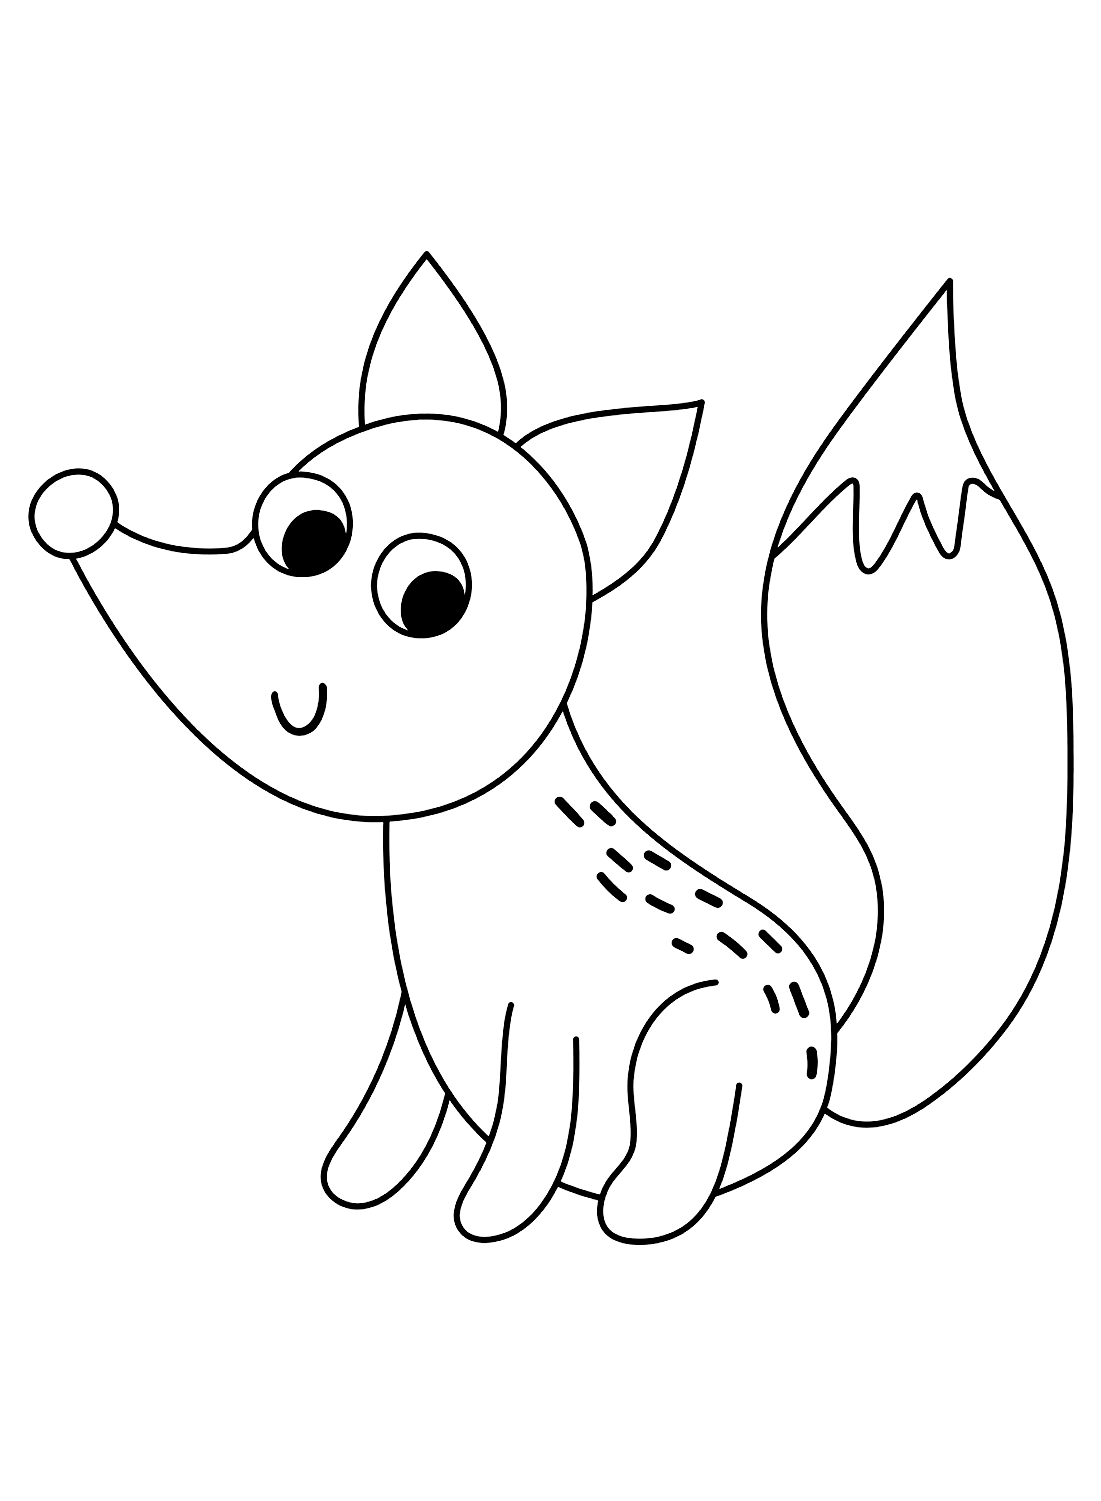 Fox Family Coloring Pages - Free Printable Coloring Pages